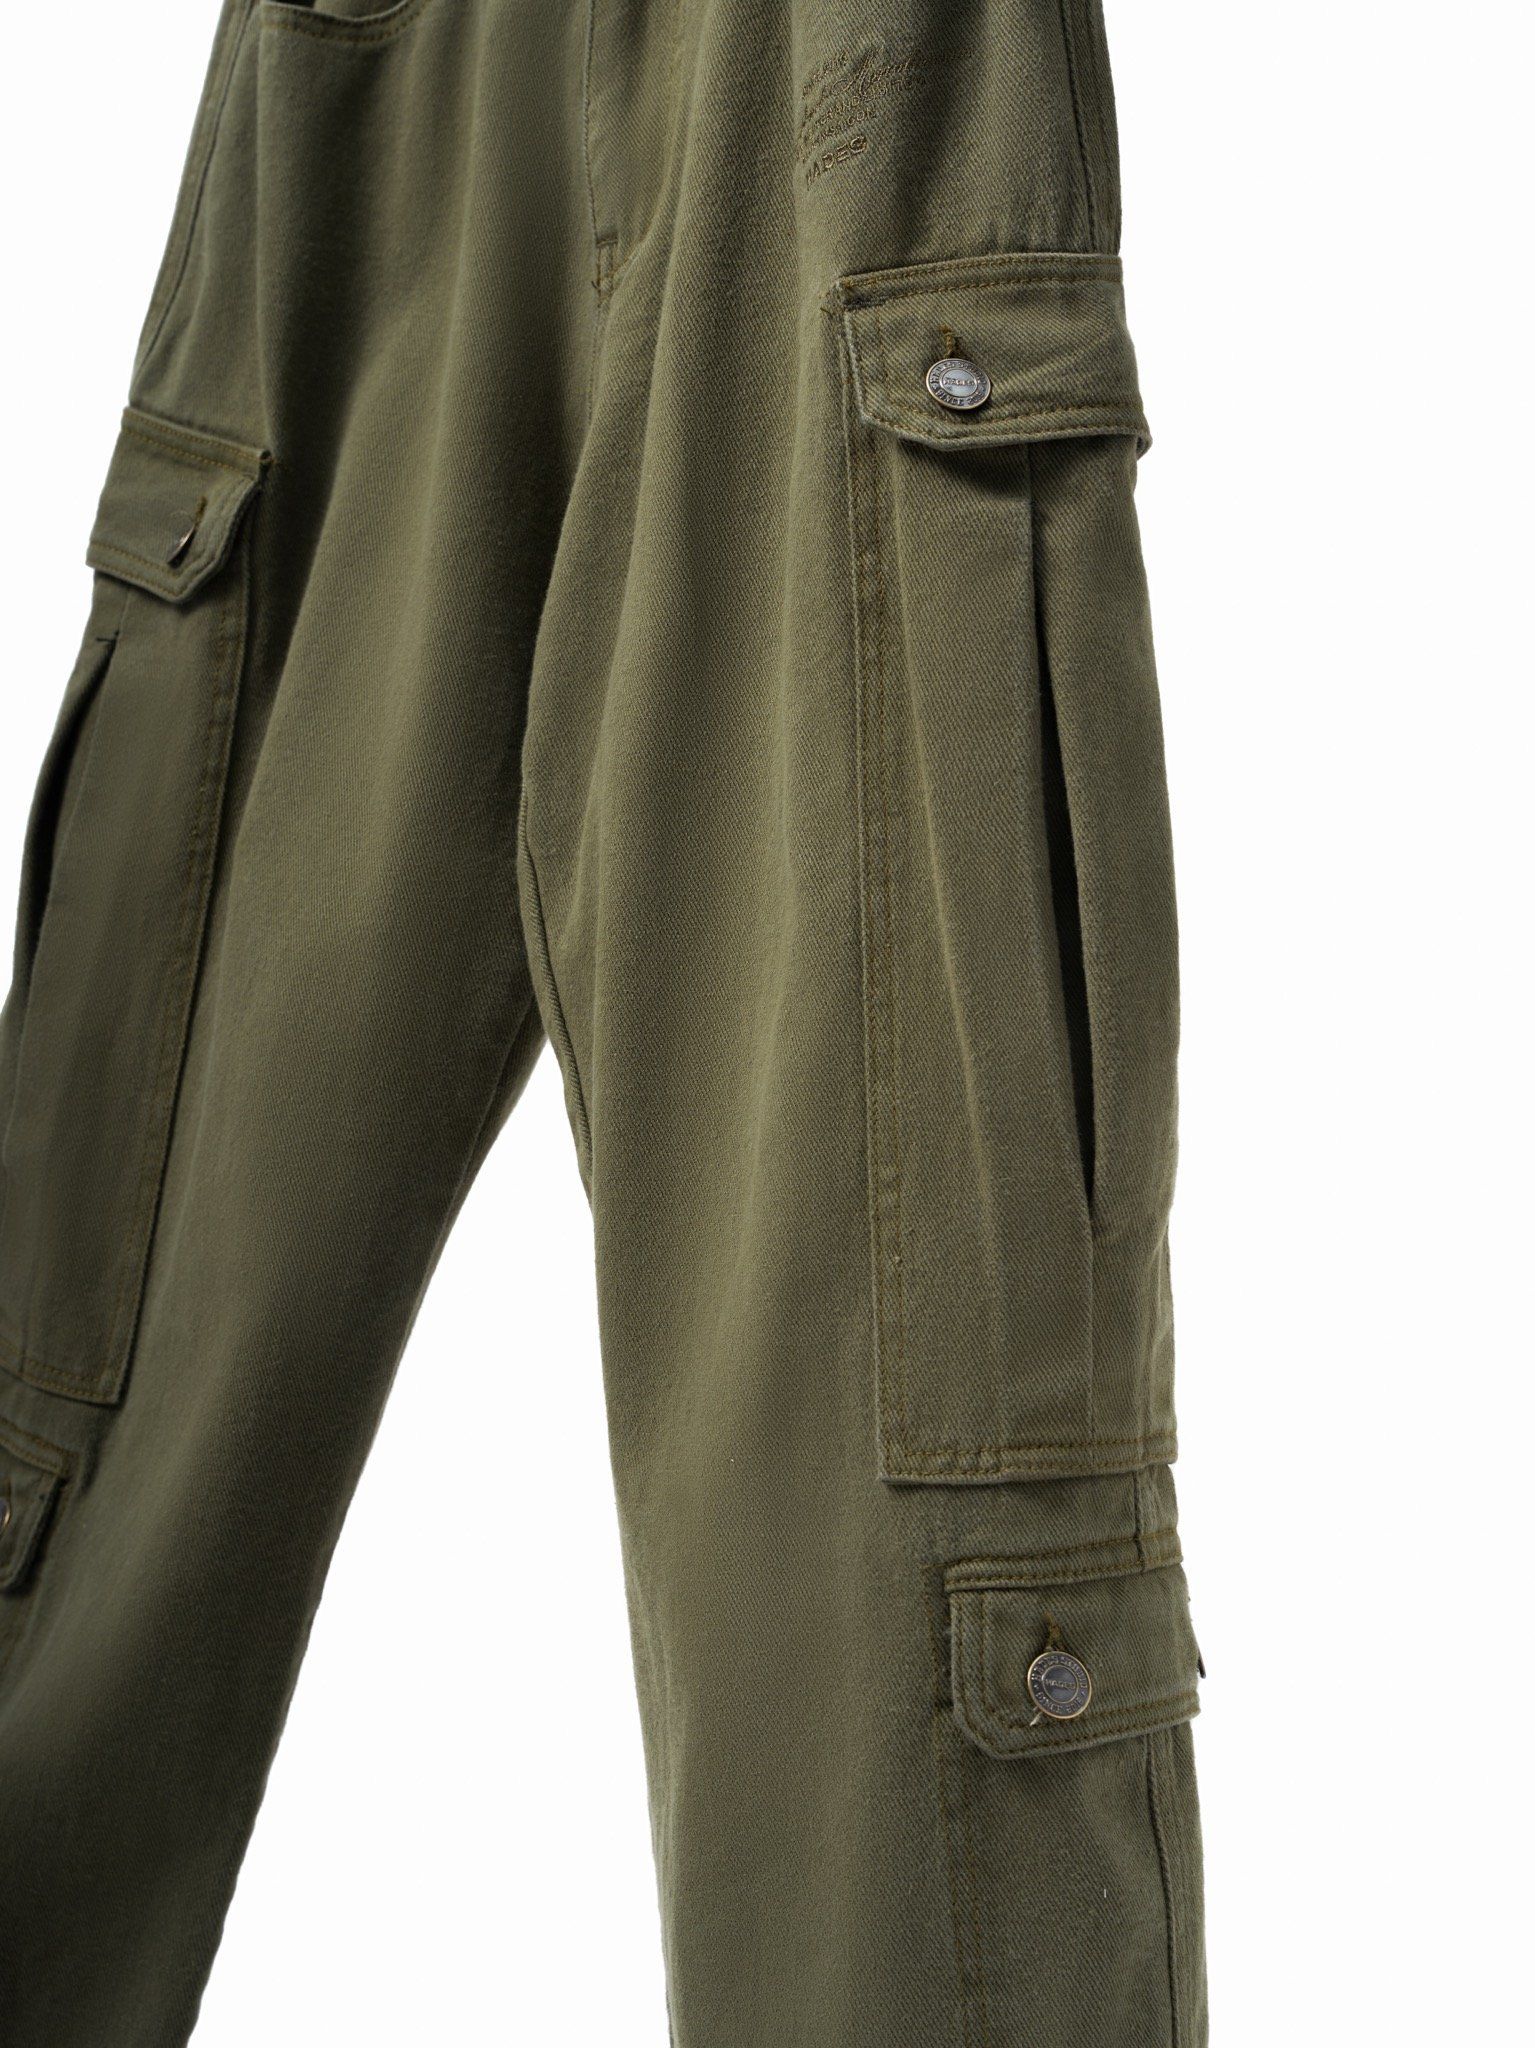  HIGHER-UP PANT 